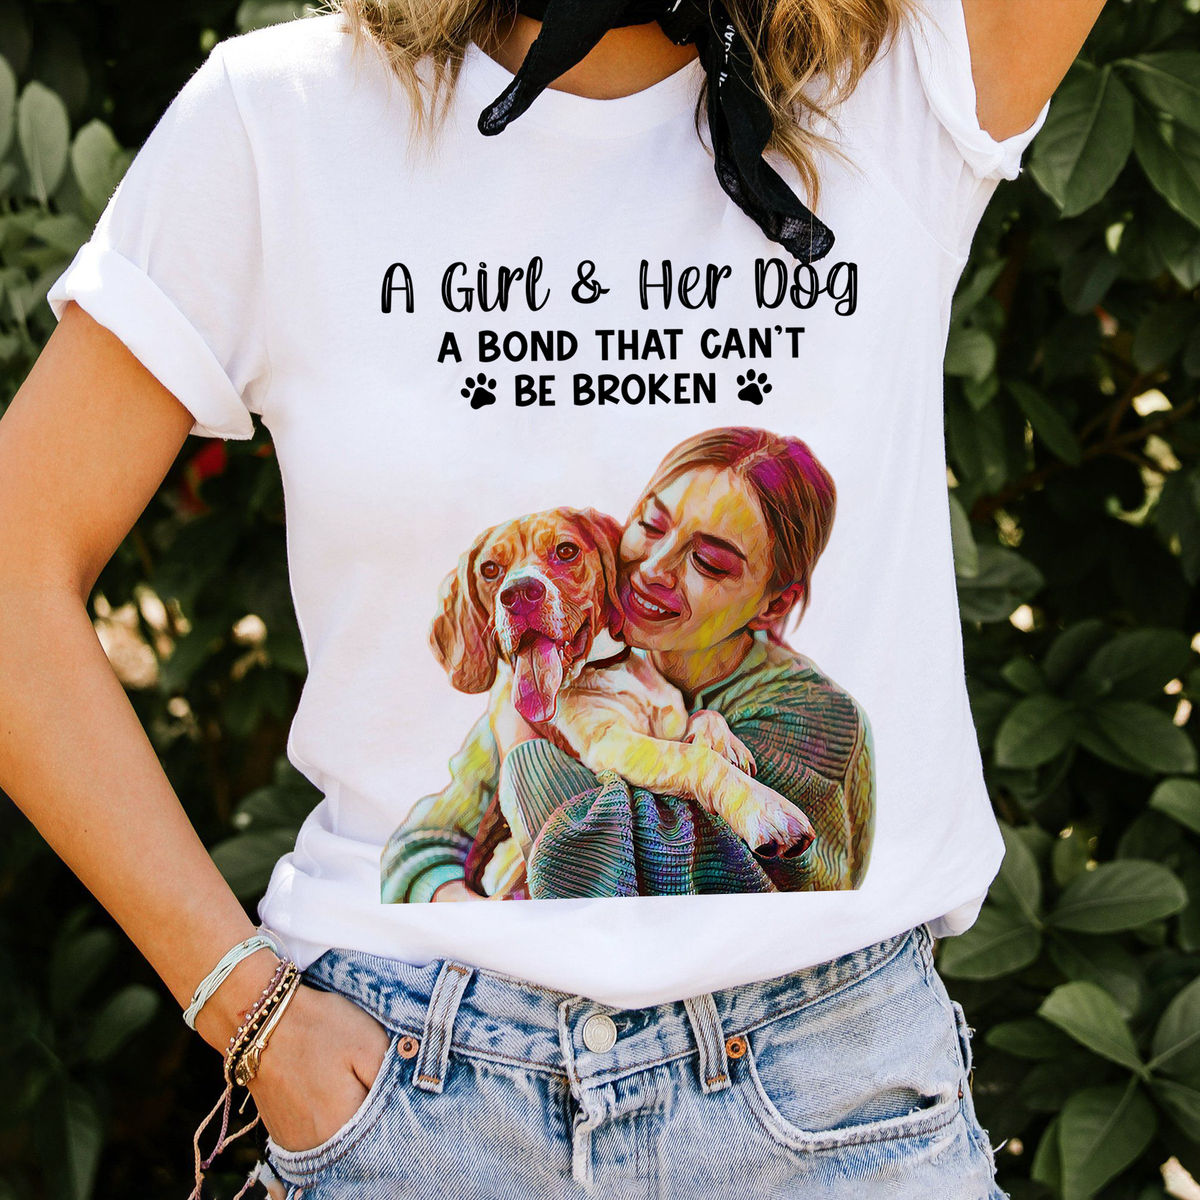 Photo T-shirt - Photo Shirt - A Girl And Her Dog A Bond That Can't Be Broken - Personalized Photo Shirt